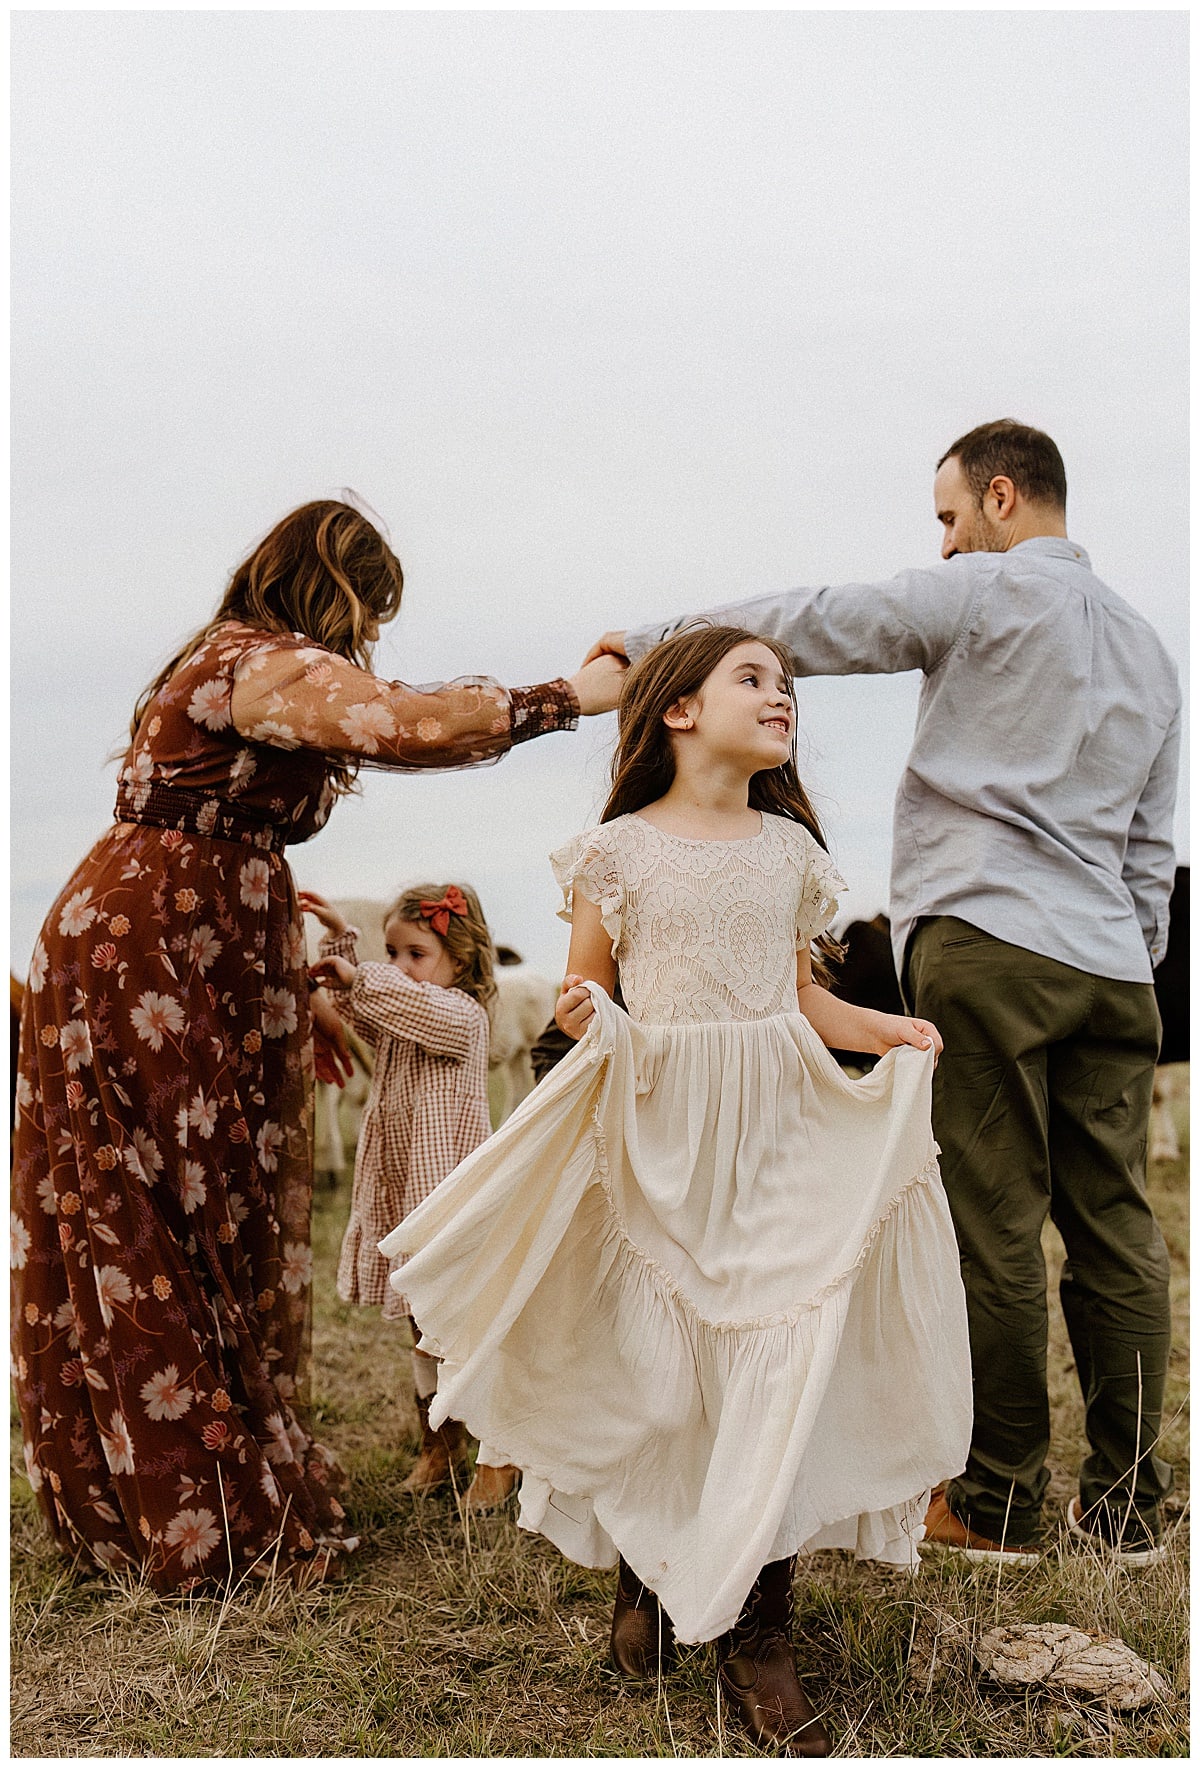 Young girl dances with her dress during their Family Adventure Session